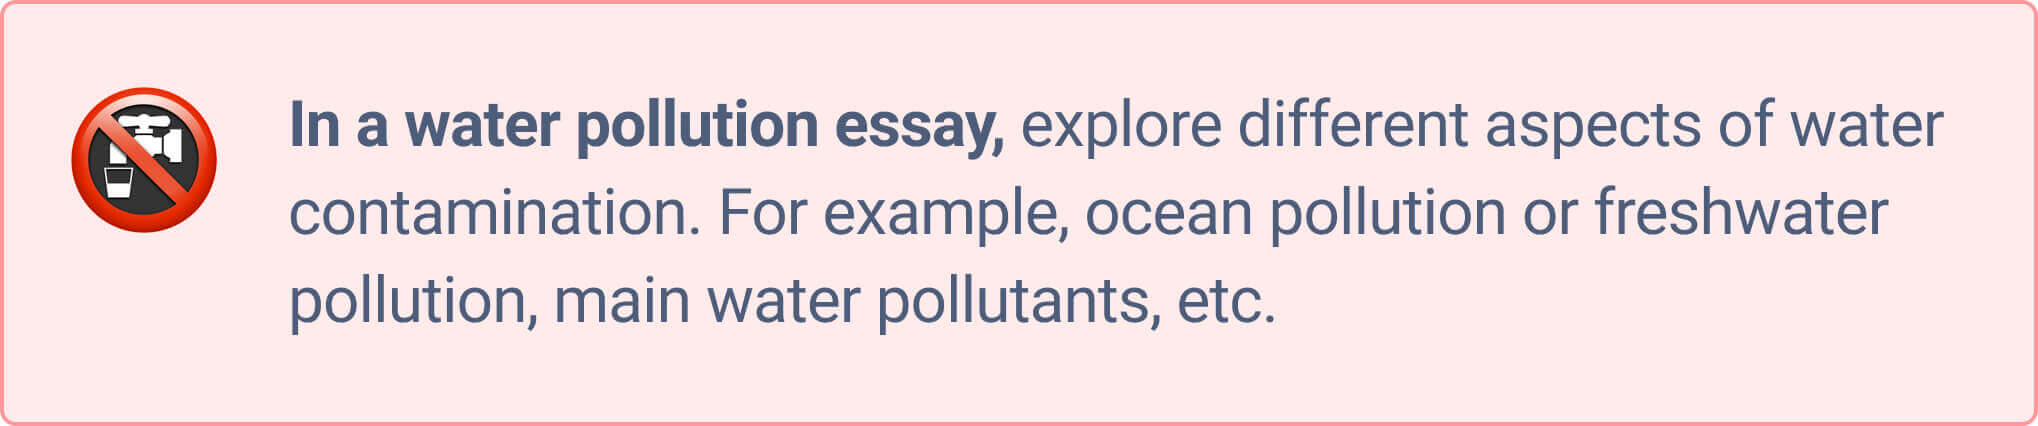 Pollution Essay. Environment and How It Is Polluted: Air, Water, Land ...